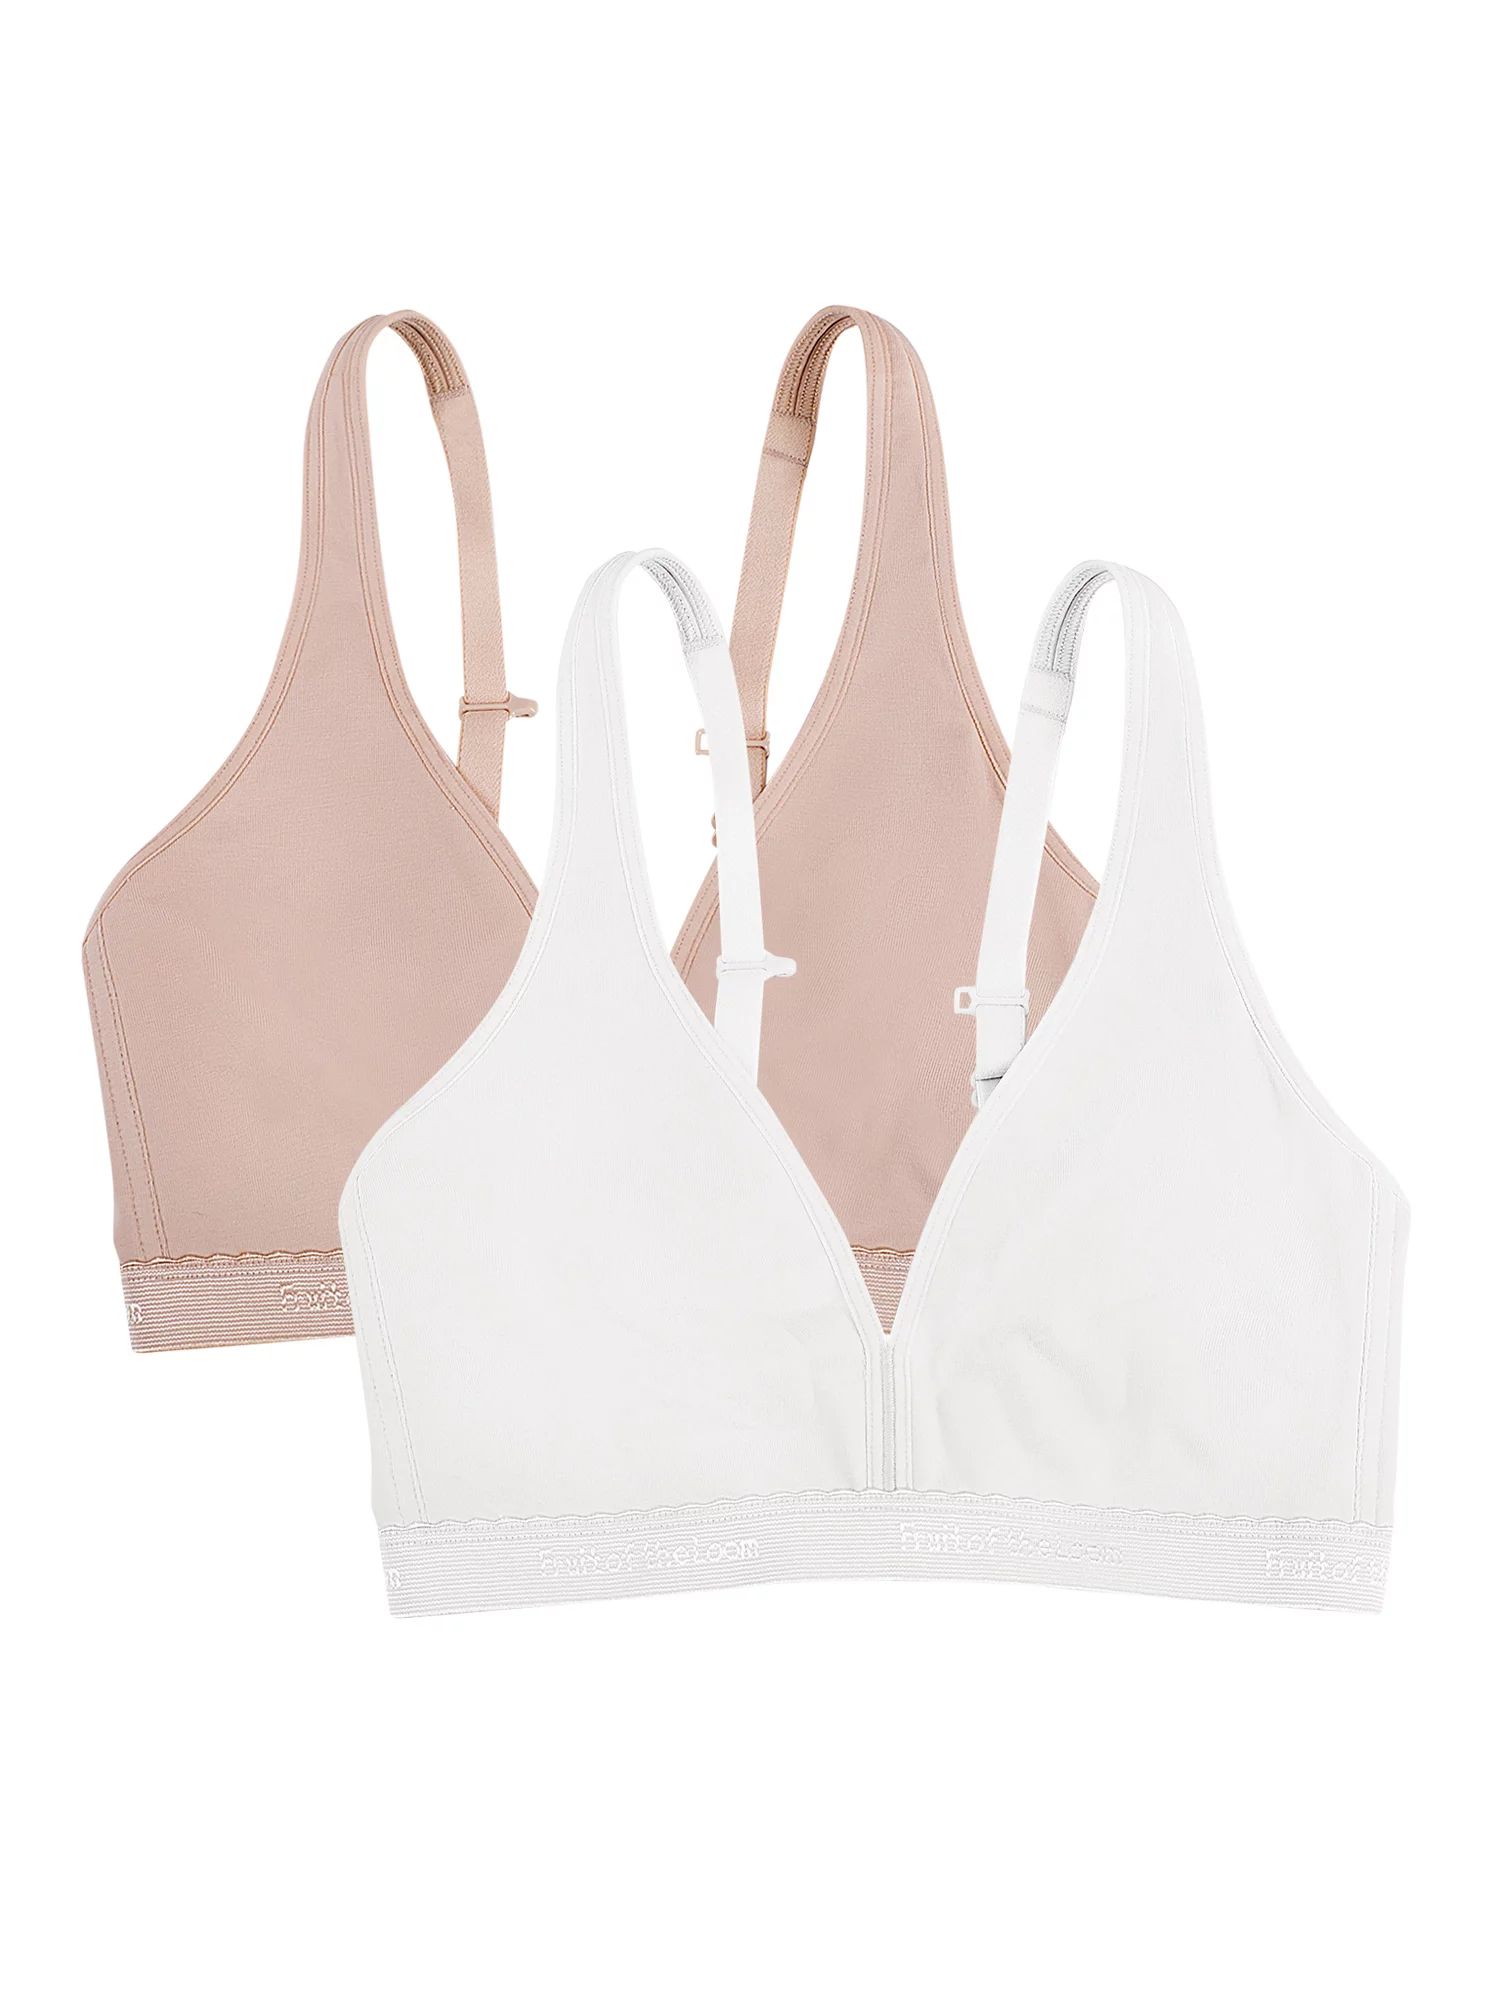 Fruit of the Loom Women's Wirefree Cotton Bralette, 2-pack, Style-FT799PK | Walmart (US)